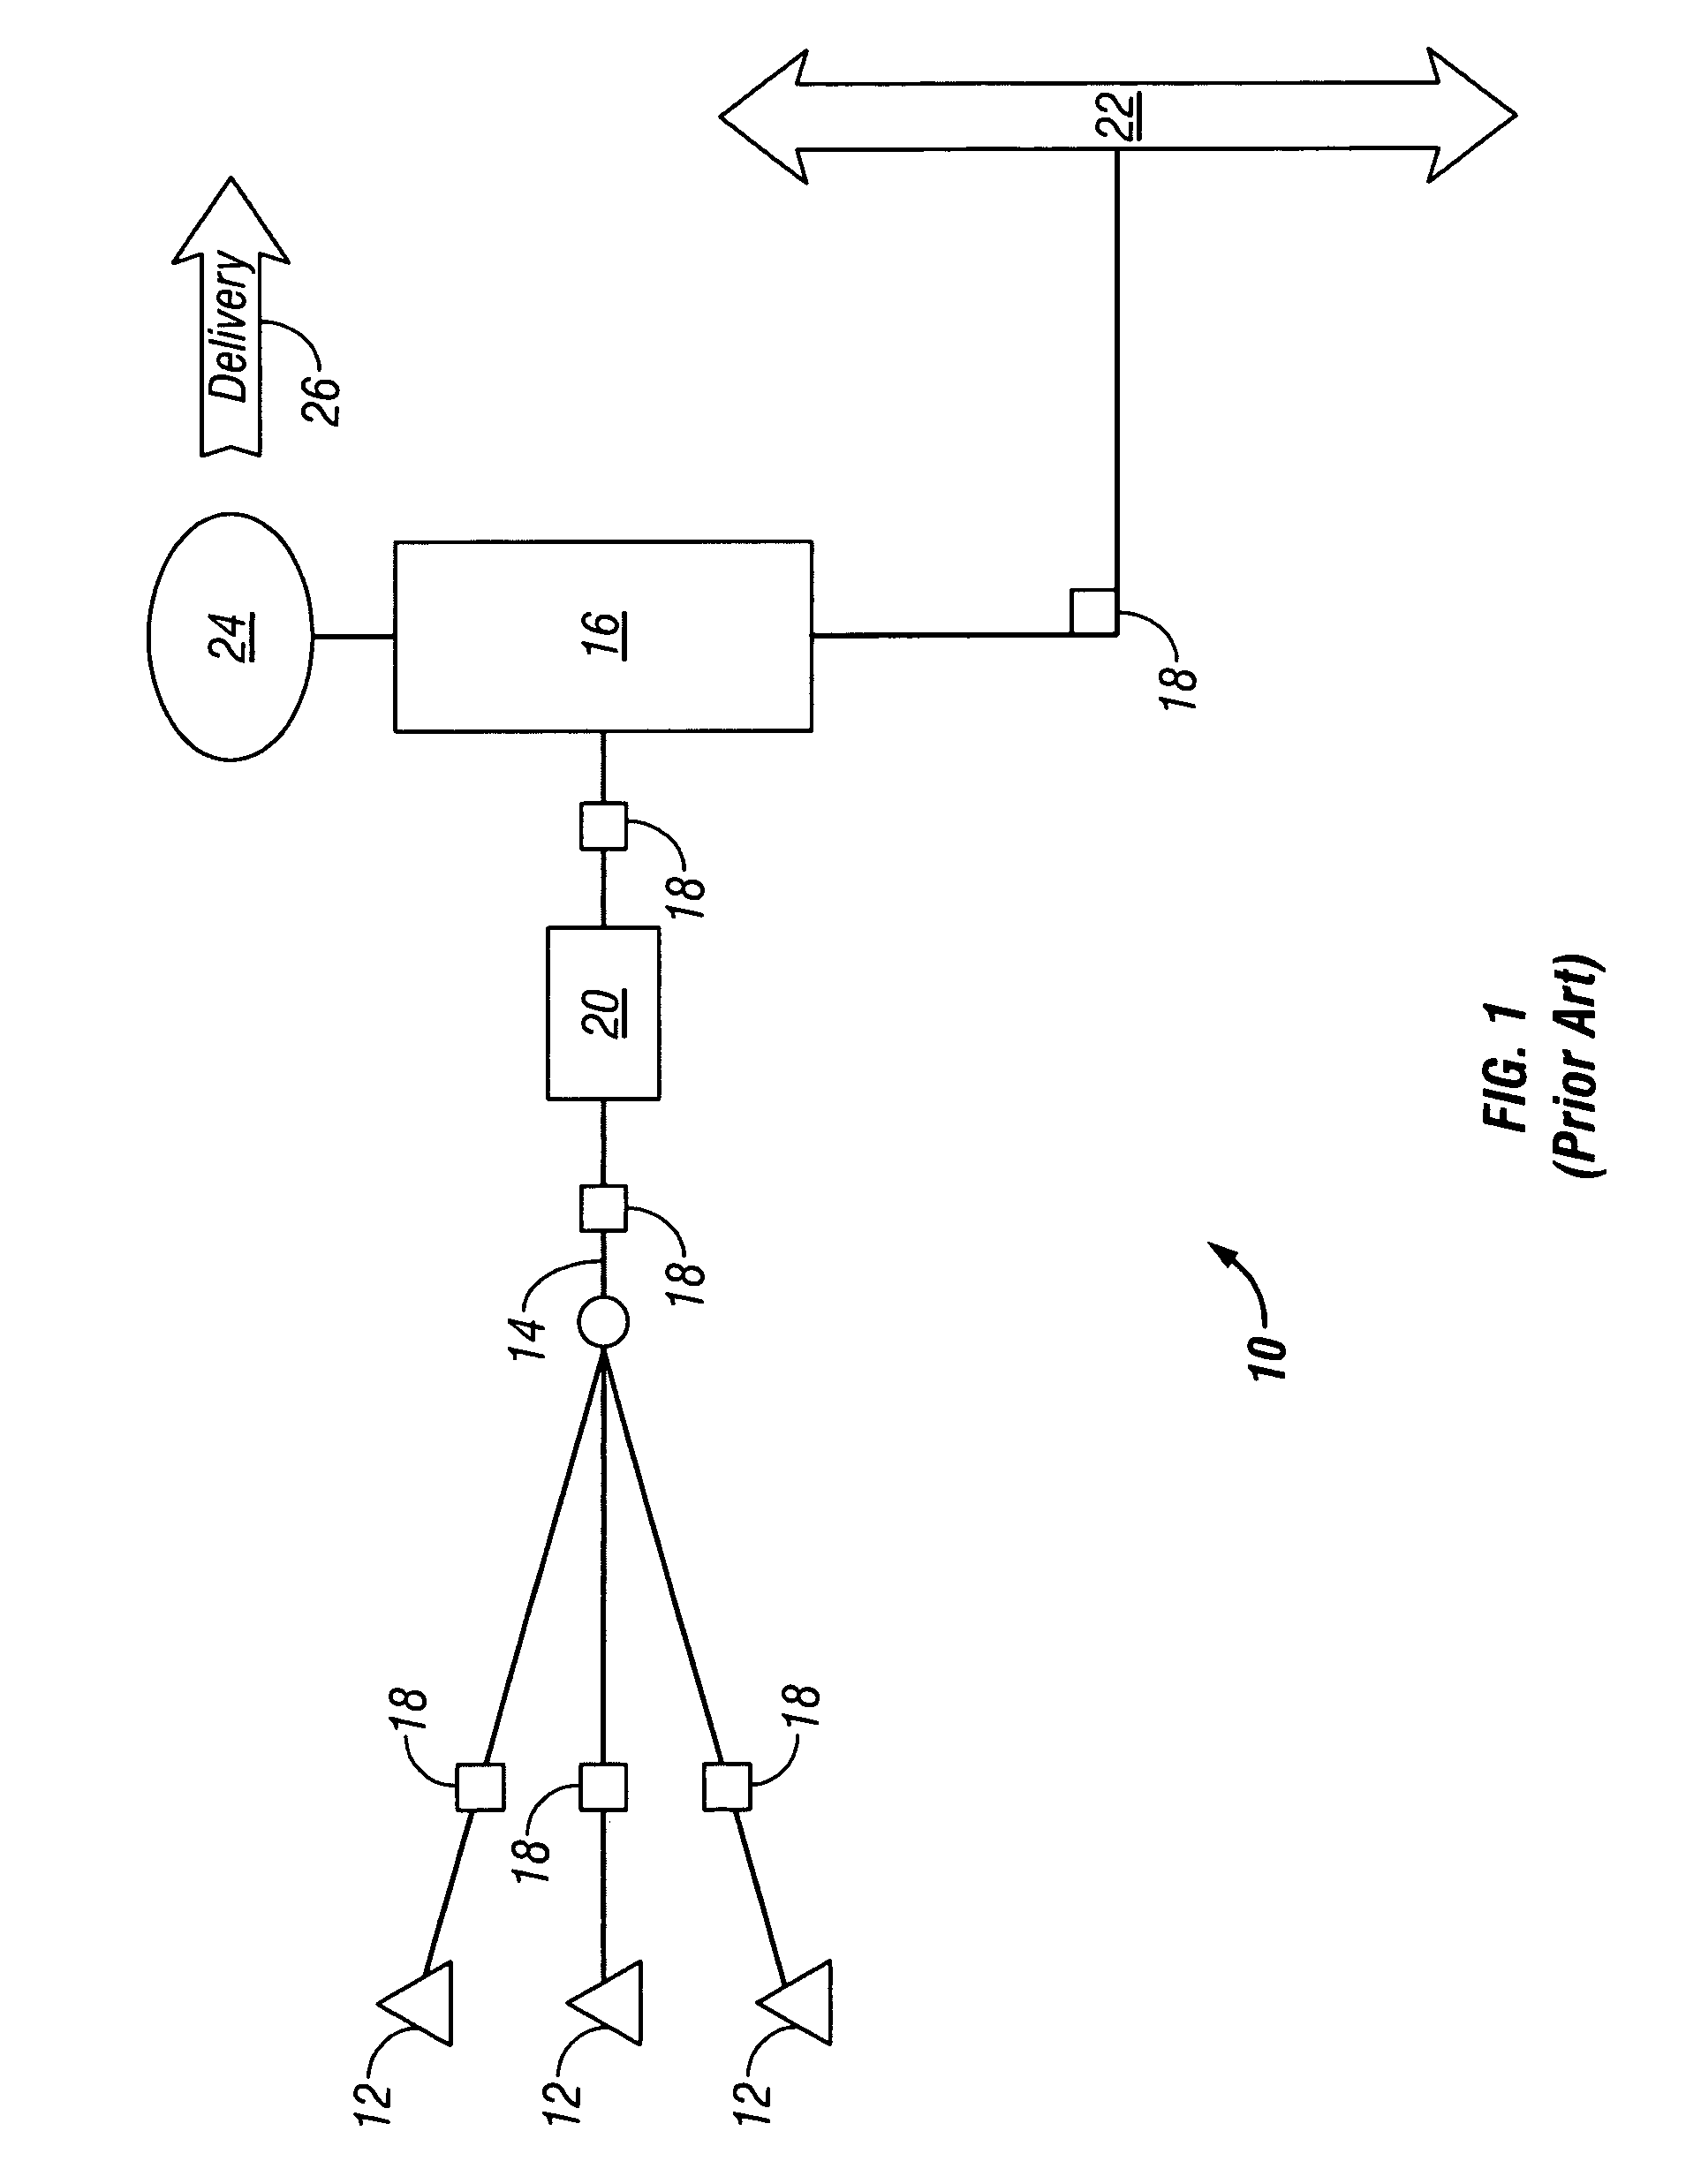 Method for automated management of hydrocarbon gathering systems